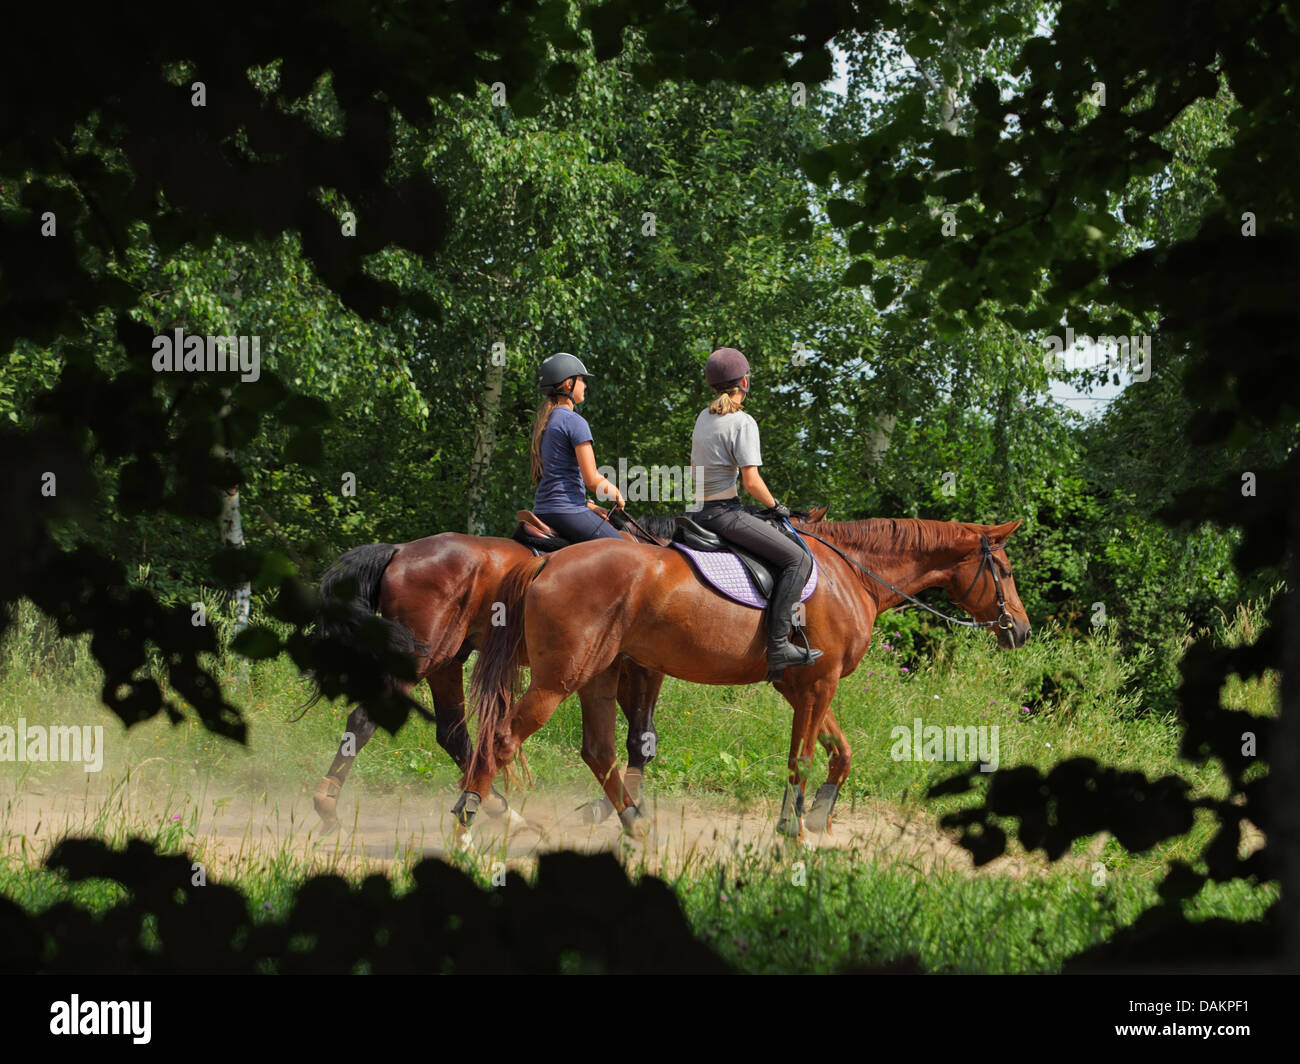 Two  young girls riding horseback on a forest road Stock Photo